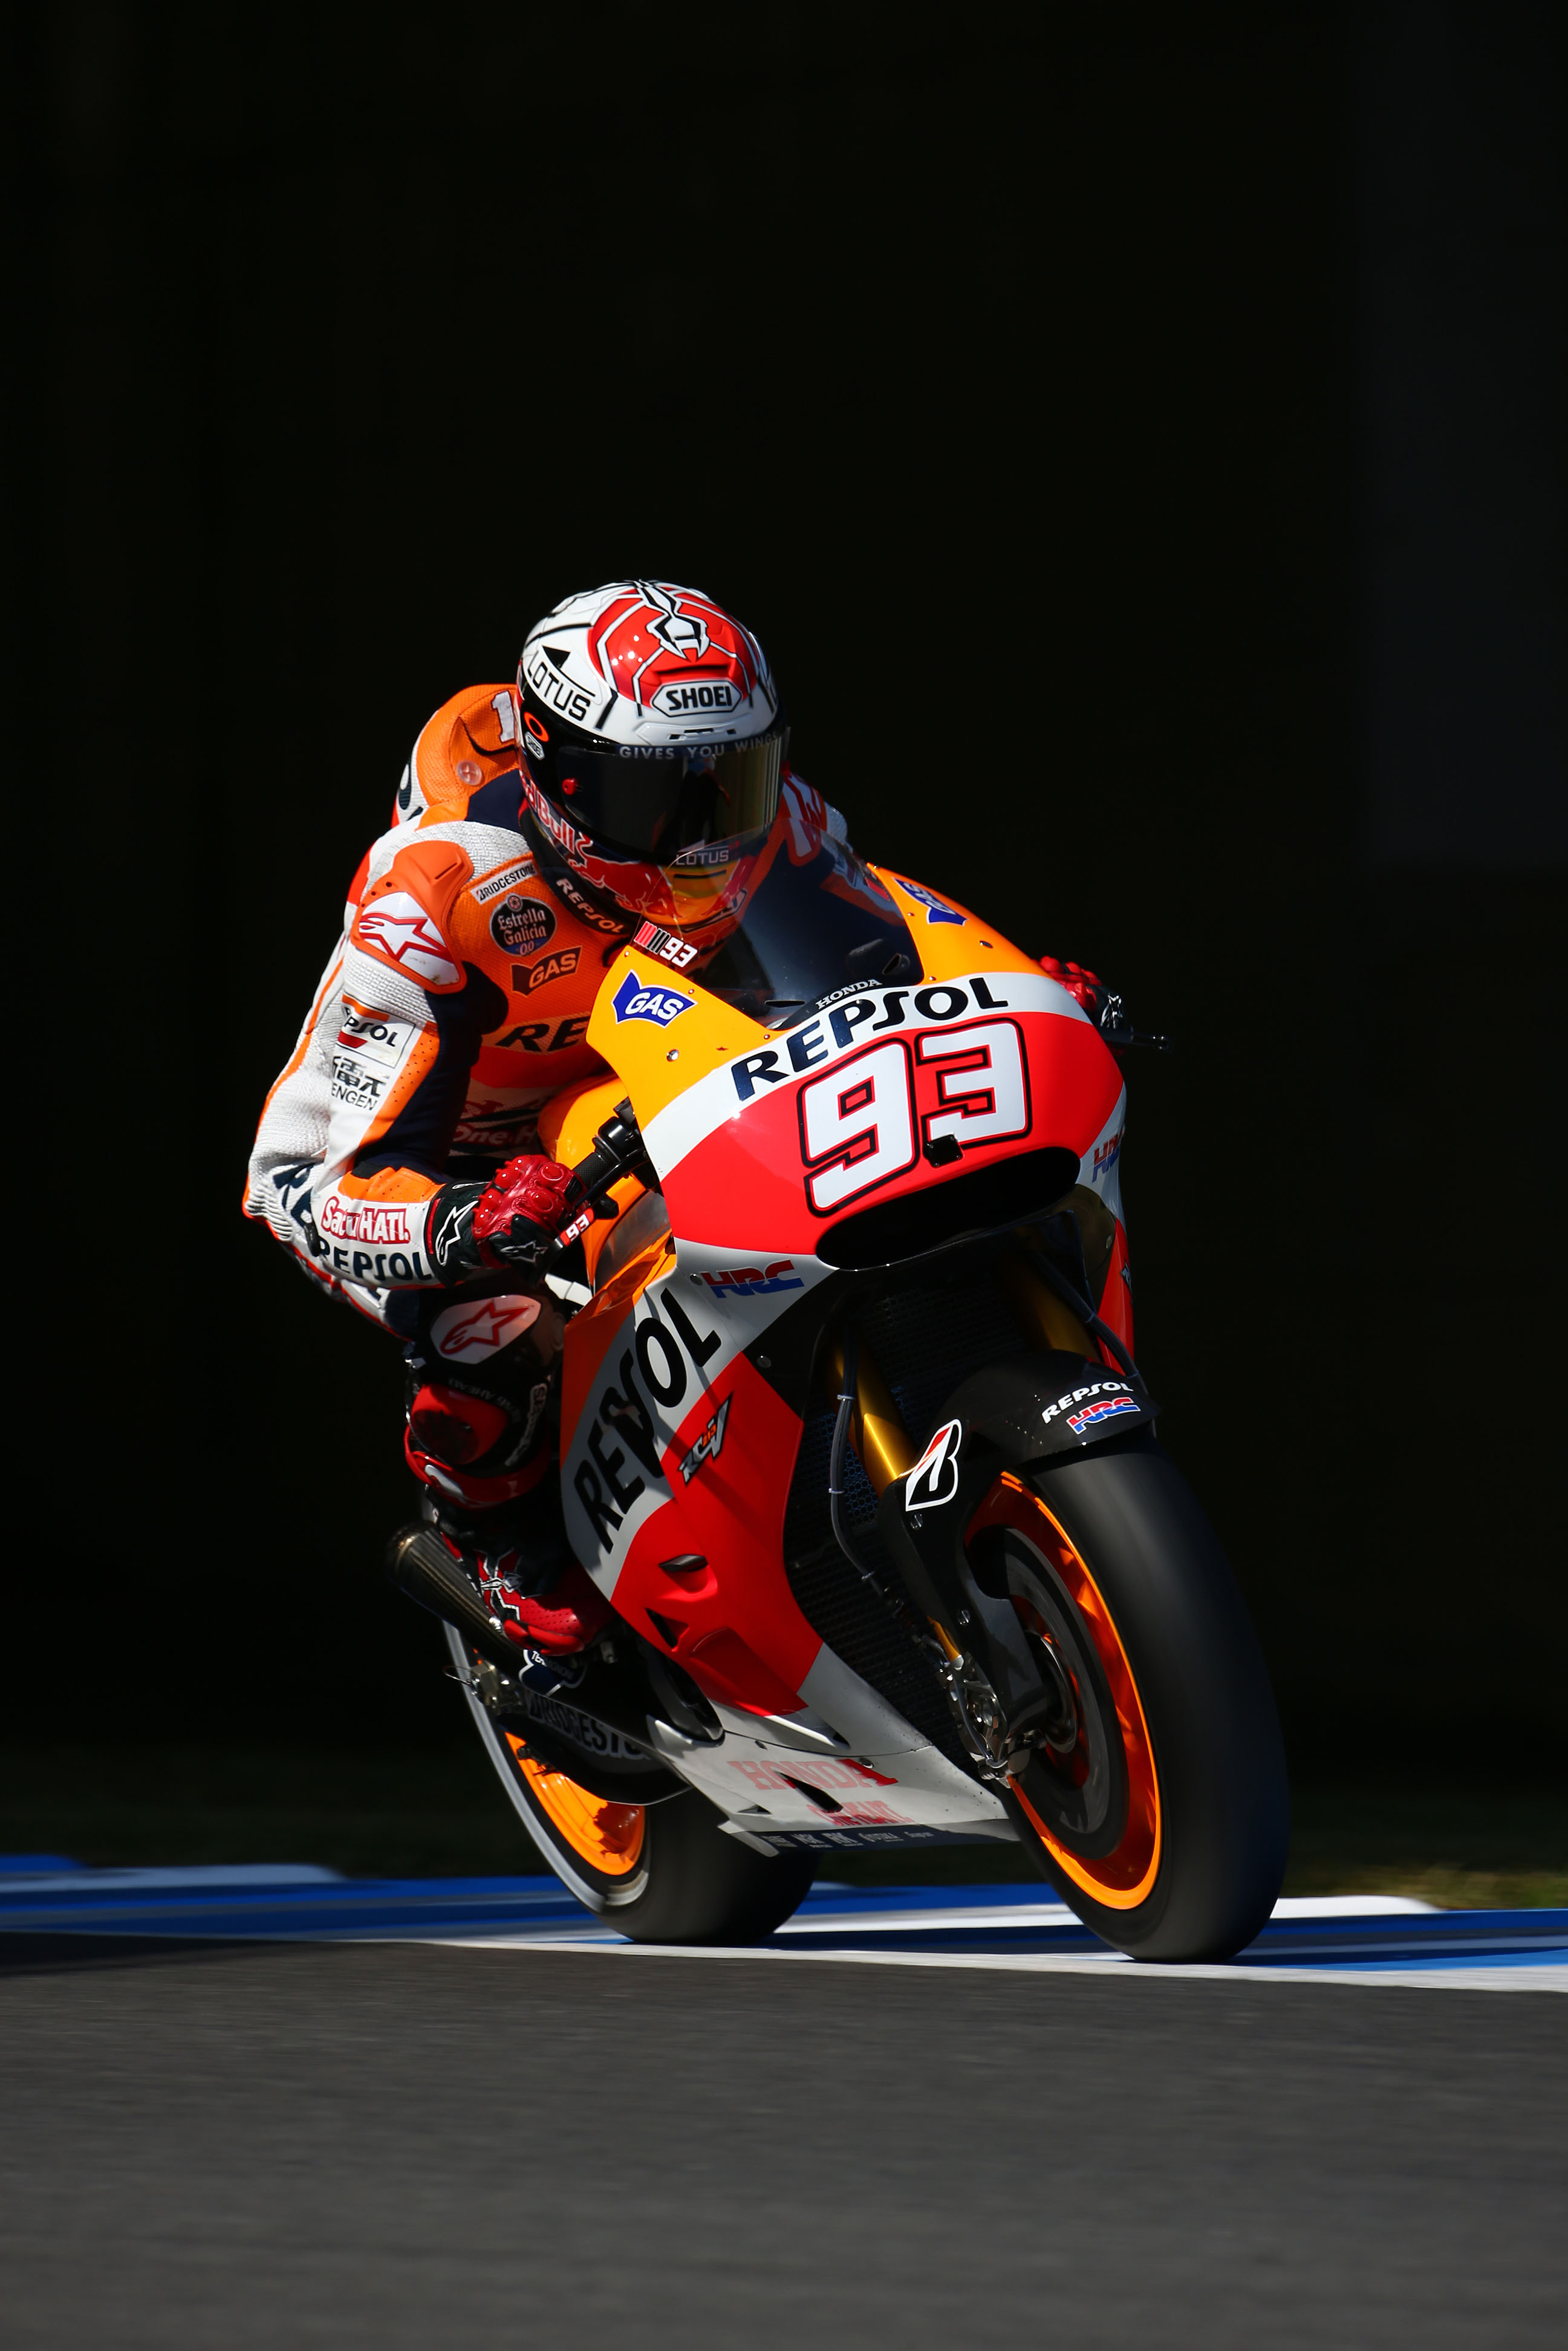 Front row start for Pedrosa in 3rd with Marquez in 4th for ...